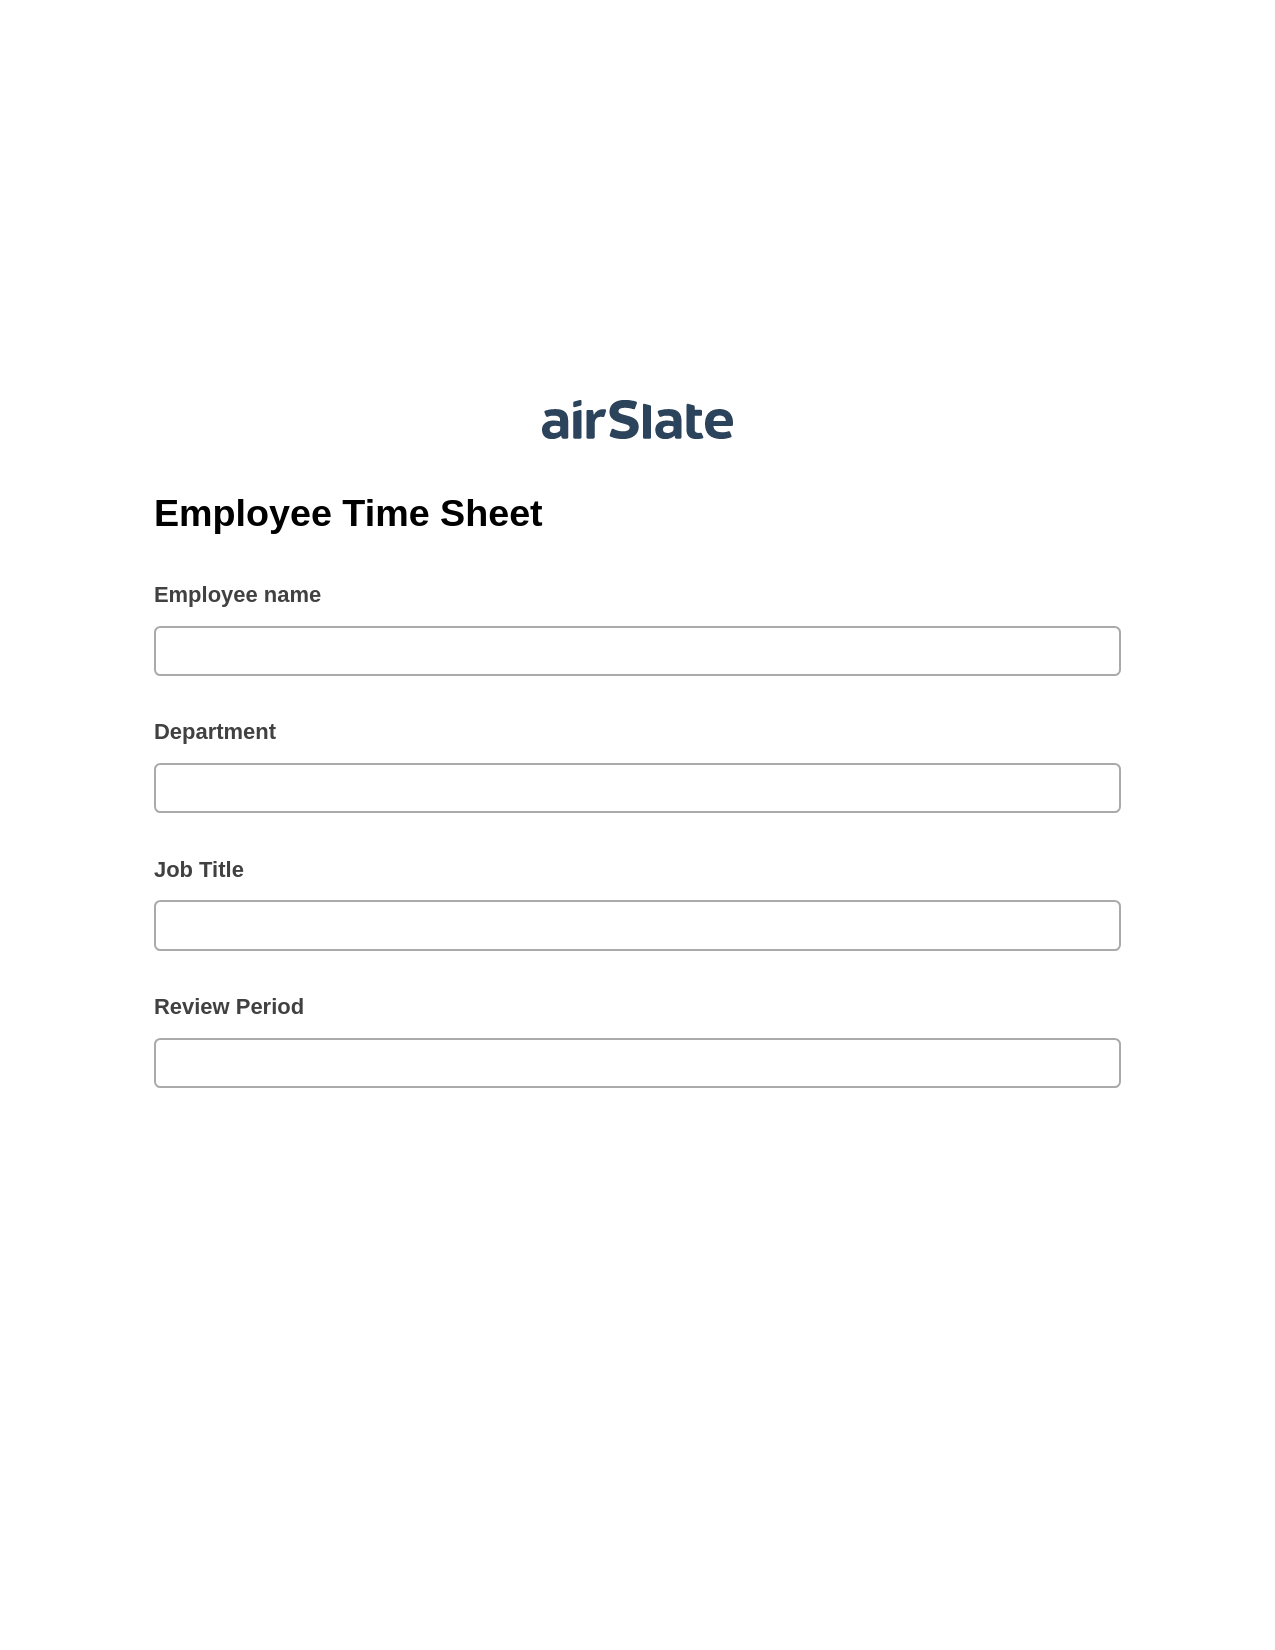 Multirole Employee Time Sheet Pre-fill from Google Sheets Bot, Lock the Slate Bot, Export to Excel 365 Bot